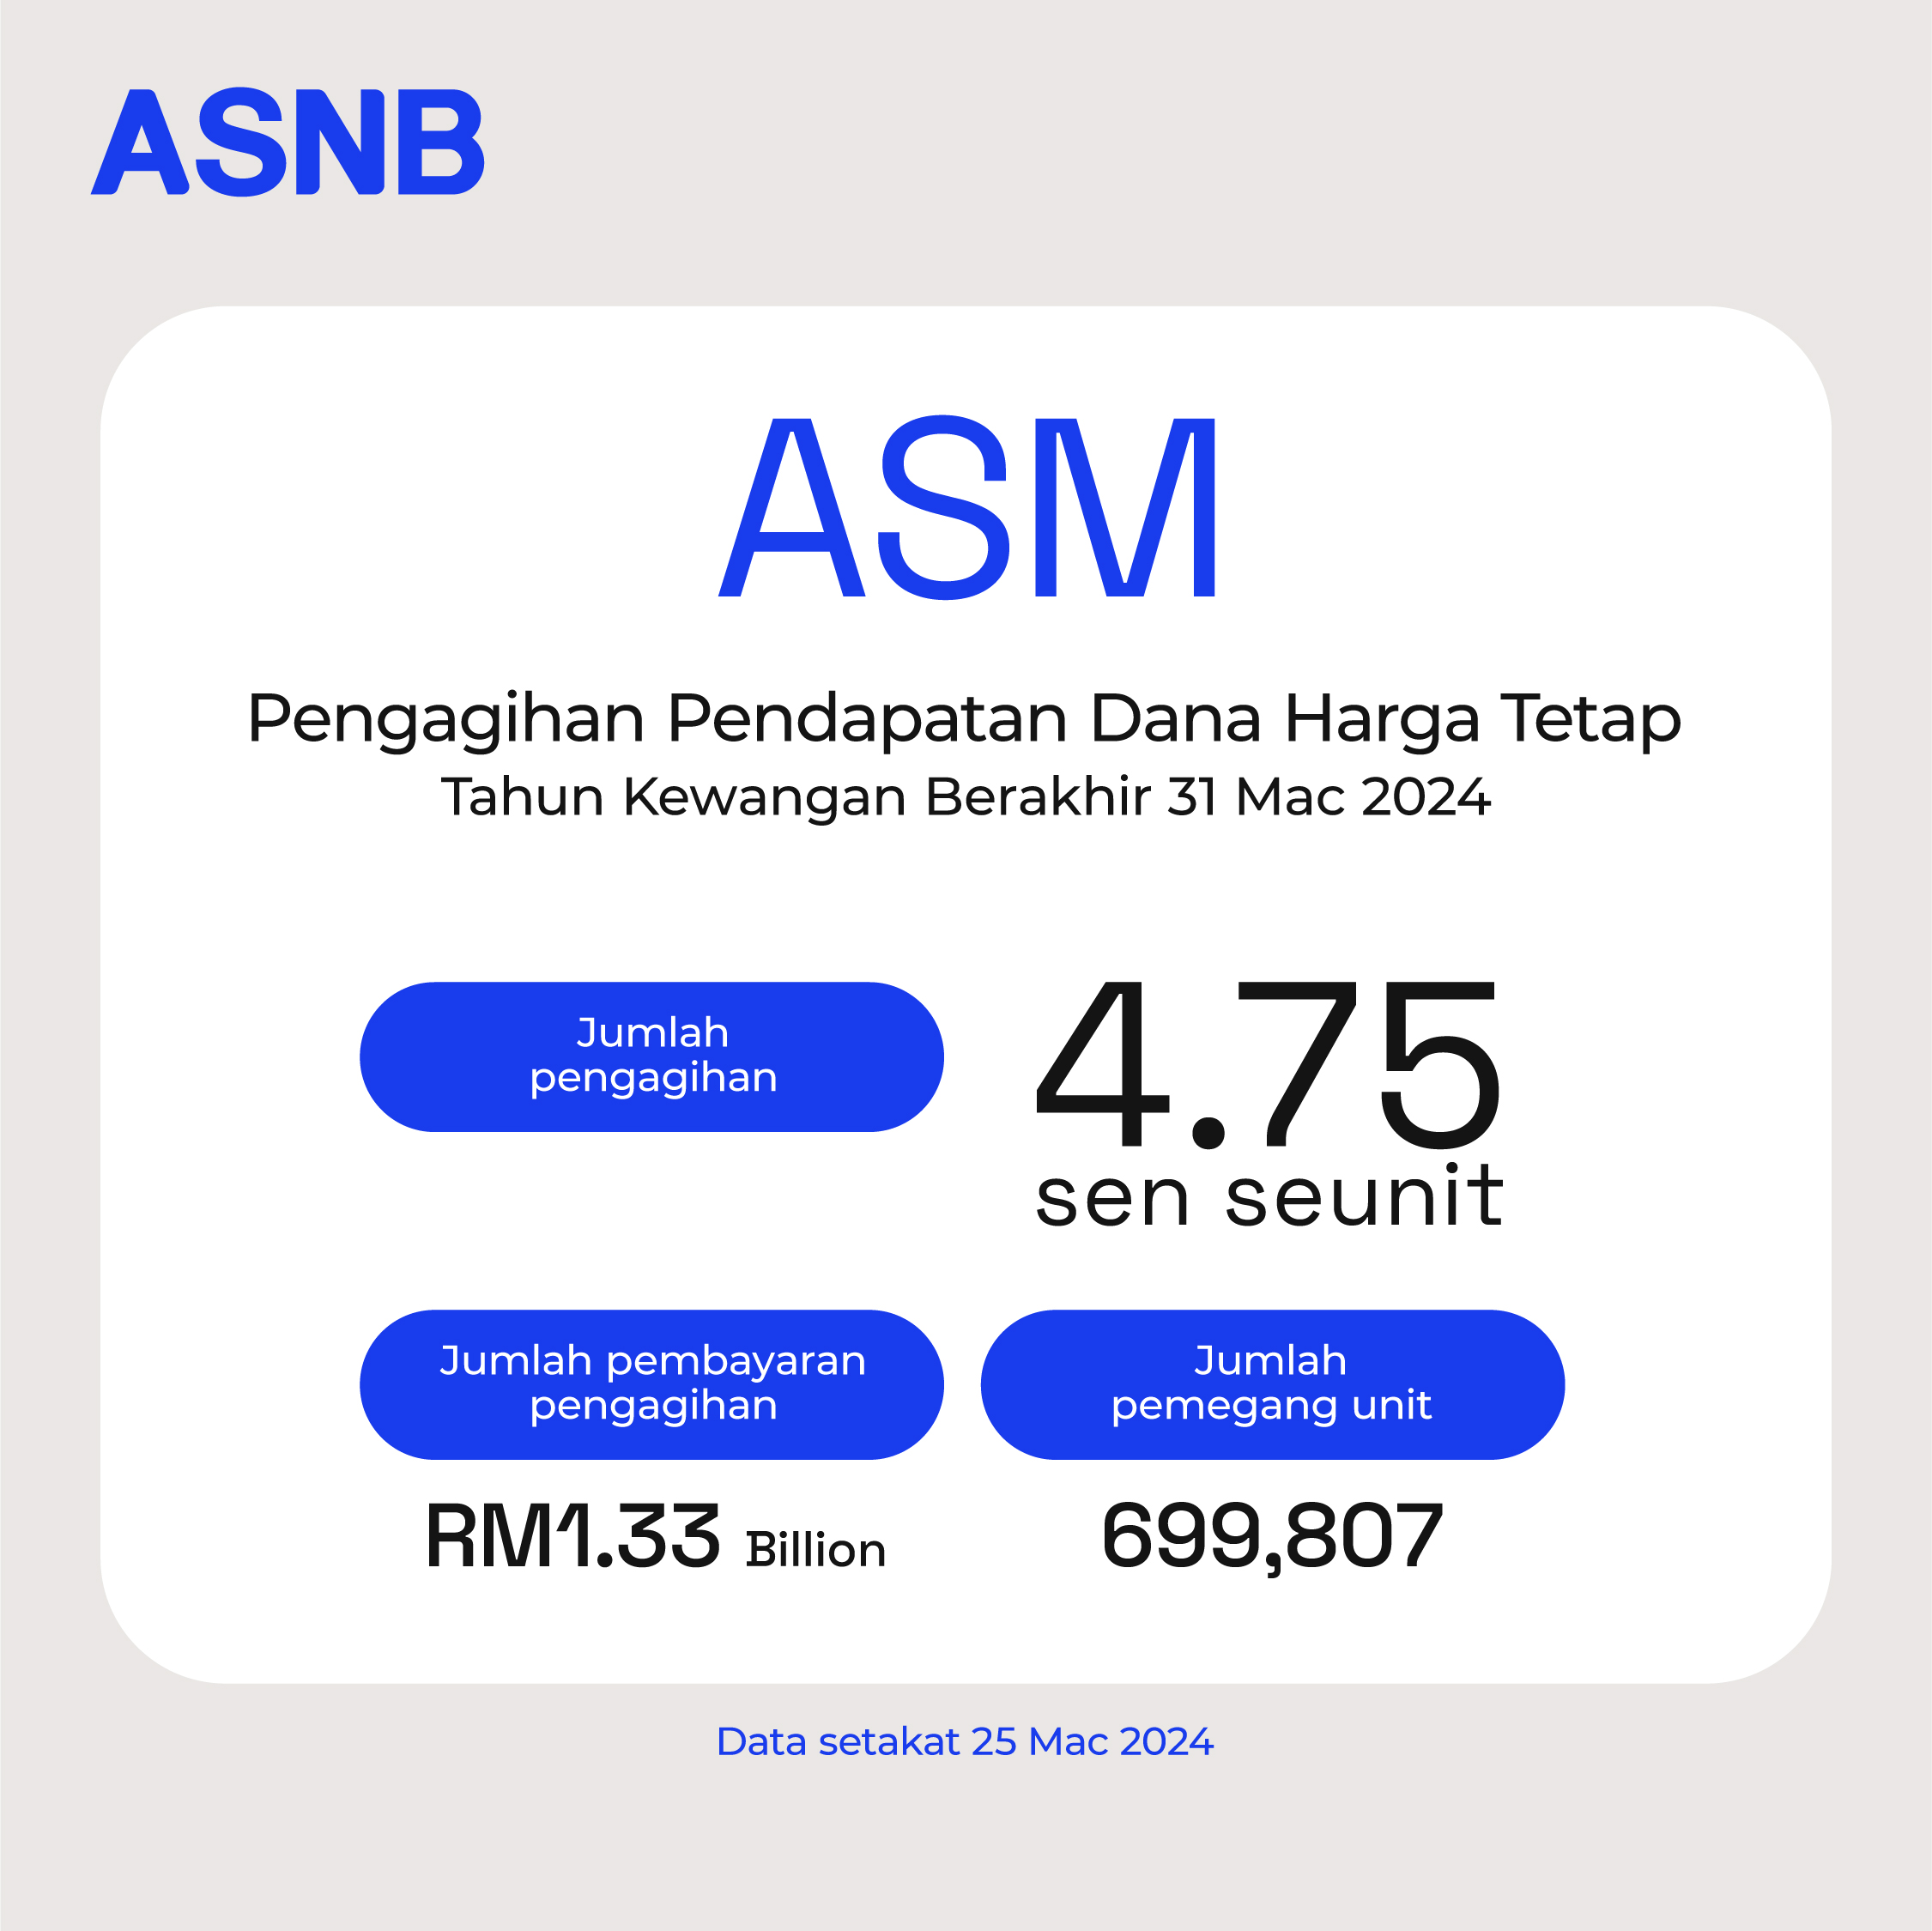 ASNB Announces RM2 Billion Income Distribution For ASB 2 And ASM Funds  | WeirdKaya